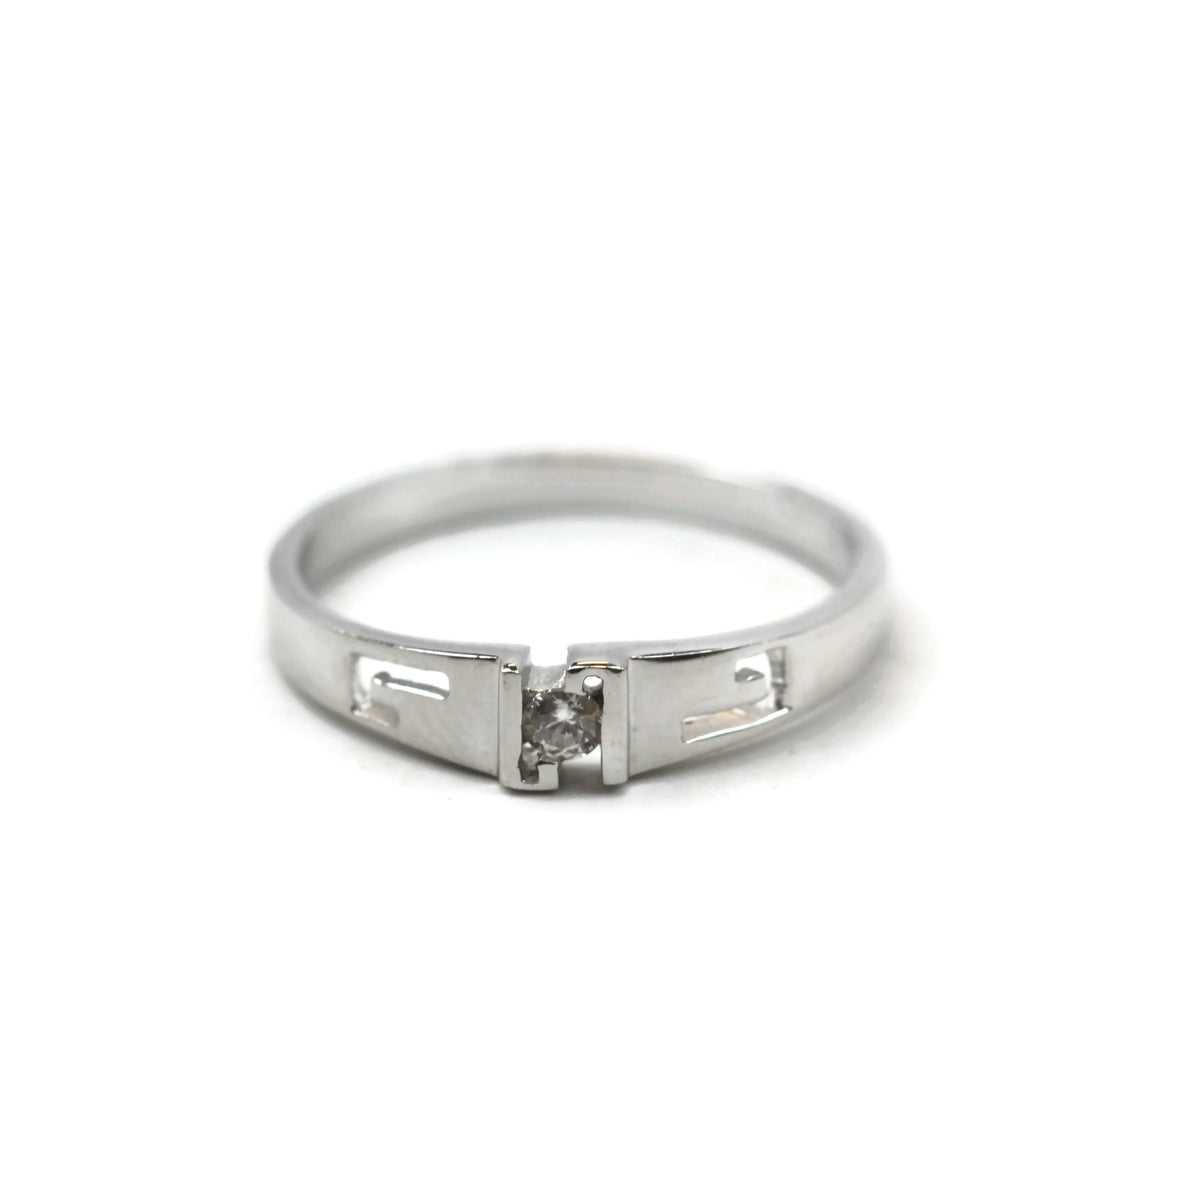 Rhodium Plated 925 Sterling Silver Cubic Zirconia Ring "L" Shape Ring